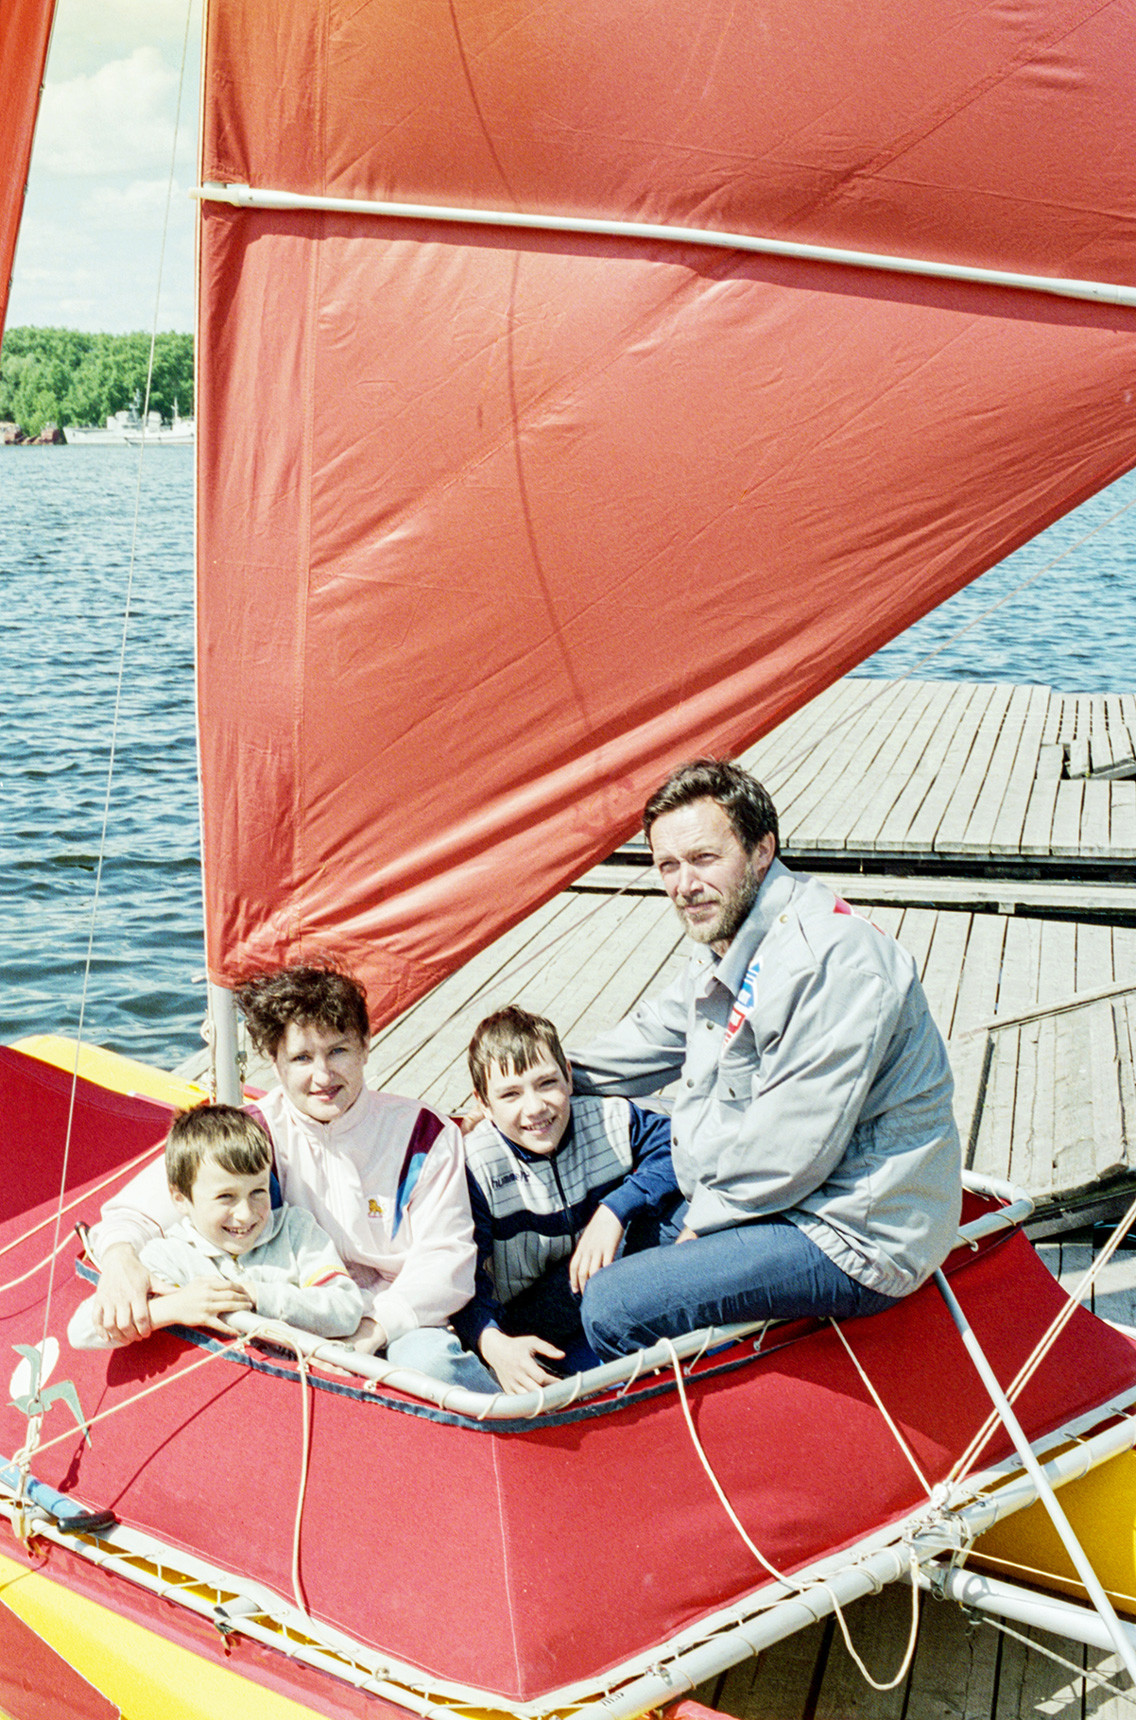 With the family, in 1997.